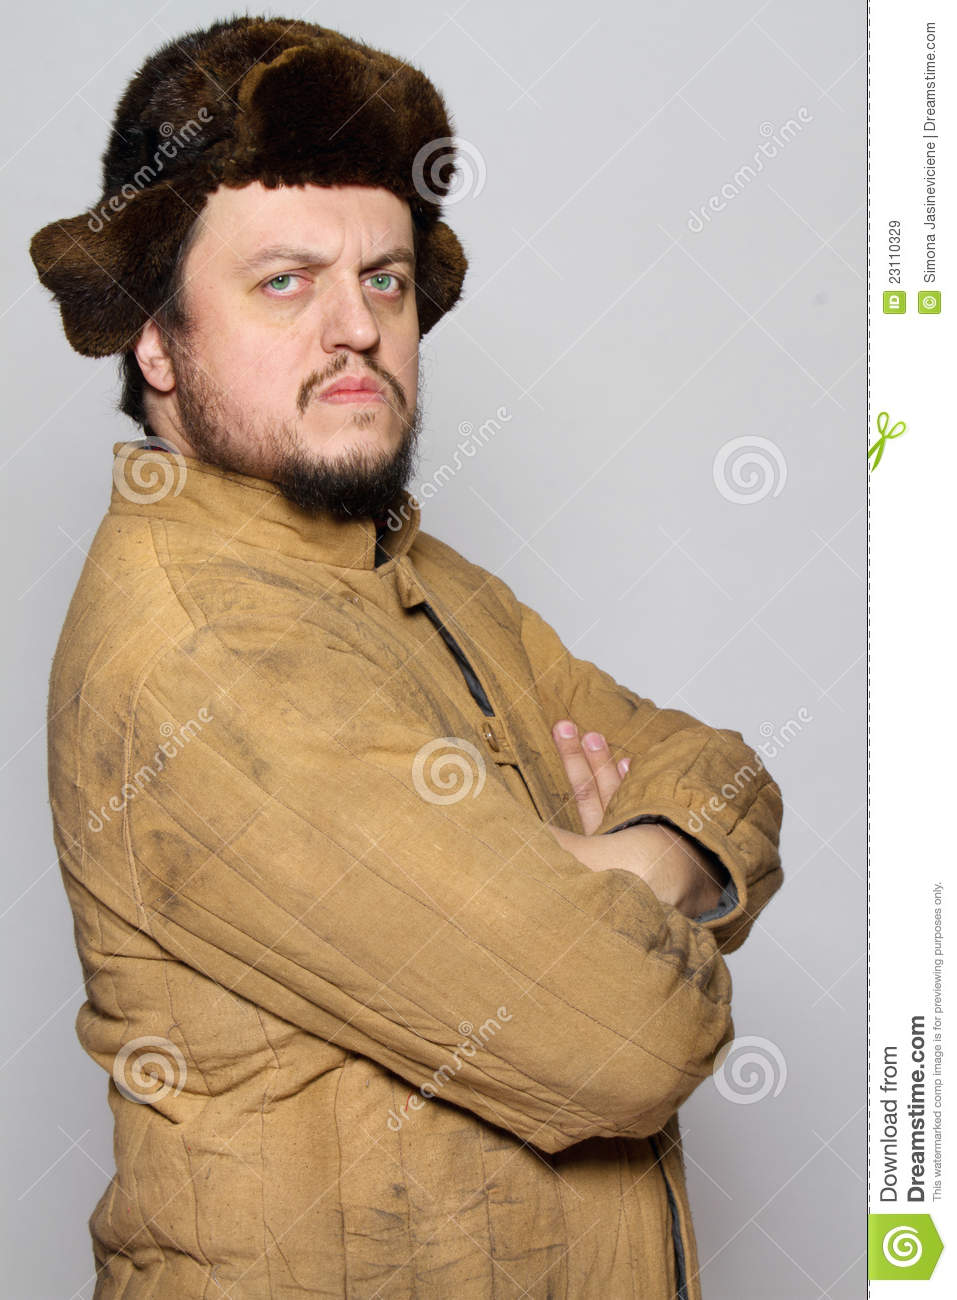 Serious Man In Hat  Old Winter Clothing  Royalty Free Stock Images    